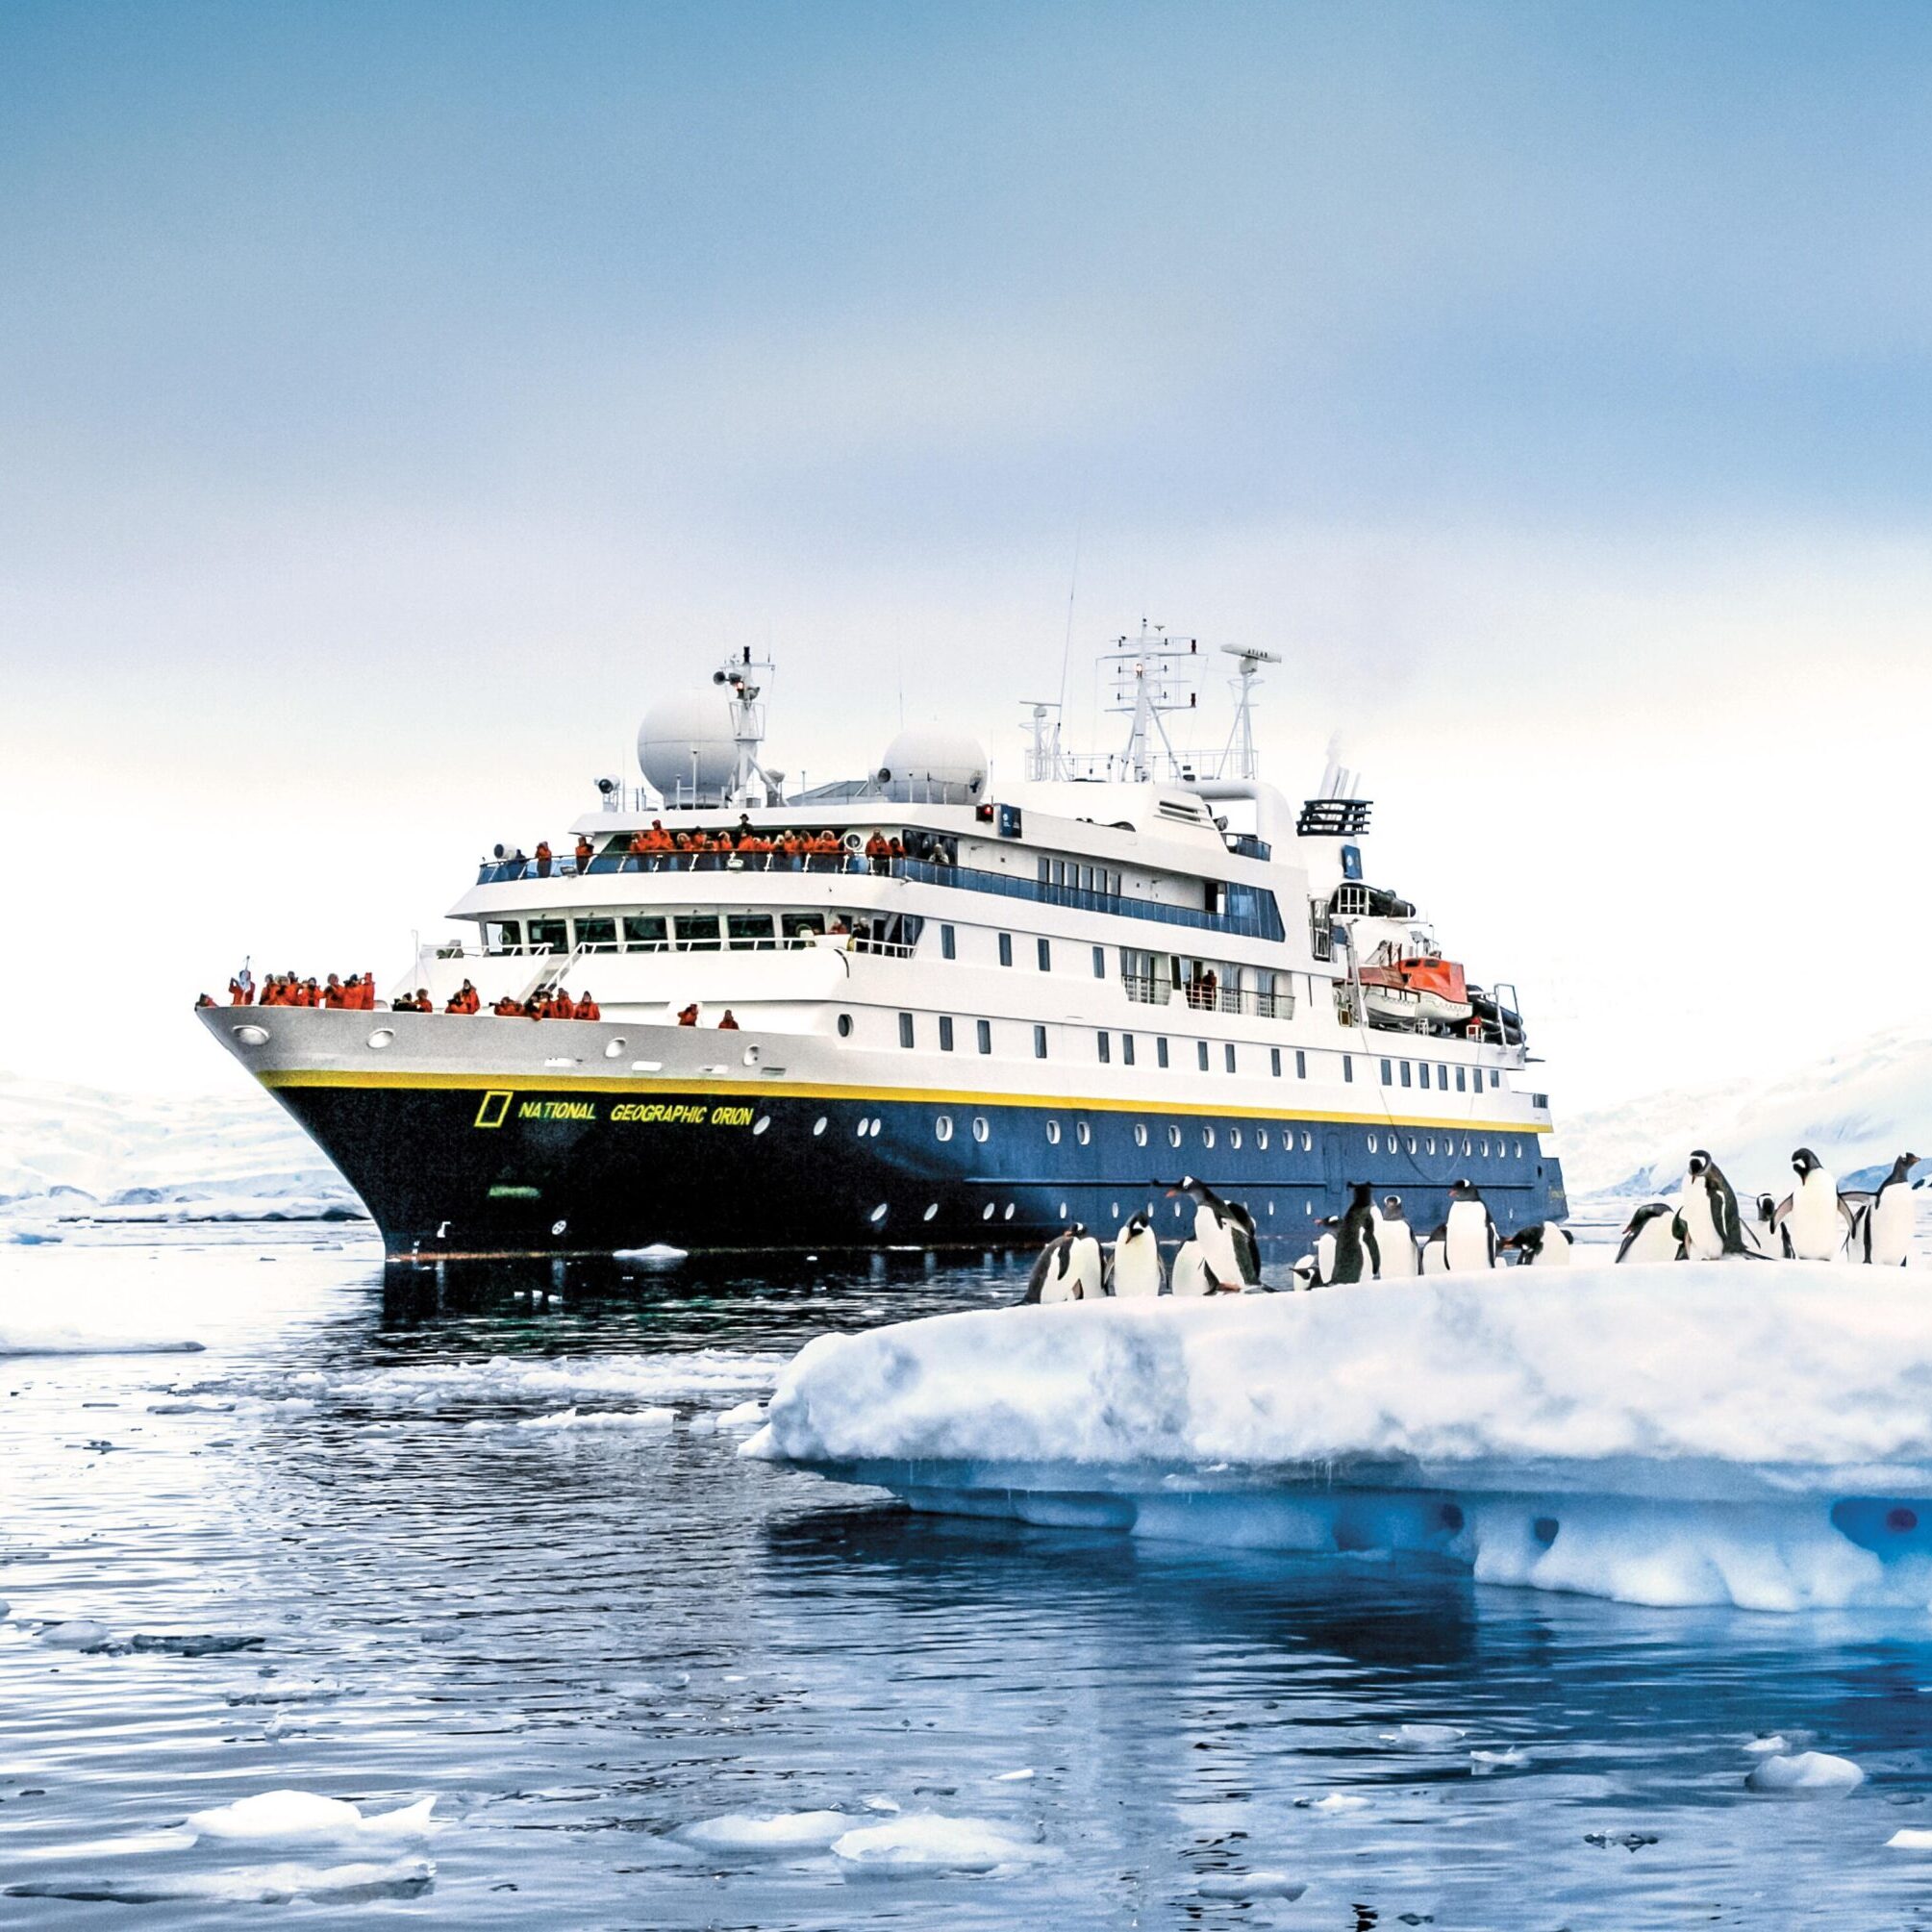 national-geographic-orion_lindblad-expeditions_expedition-cruises_antarctica_article_6462